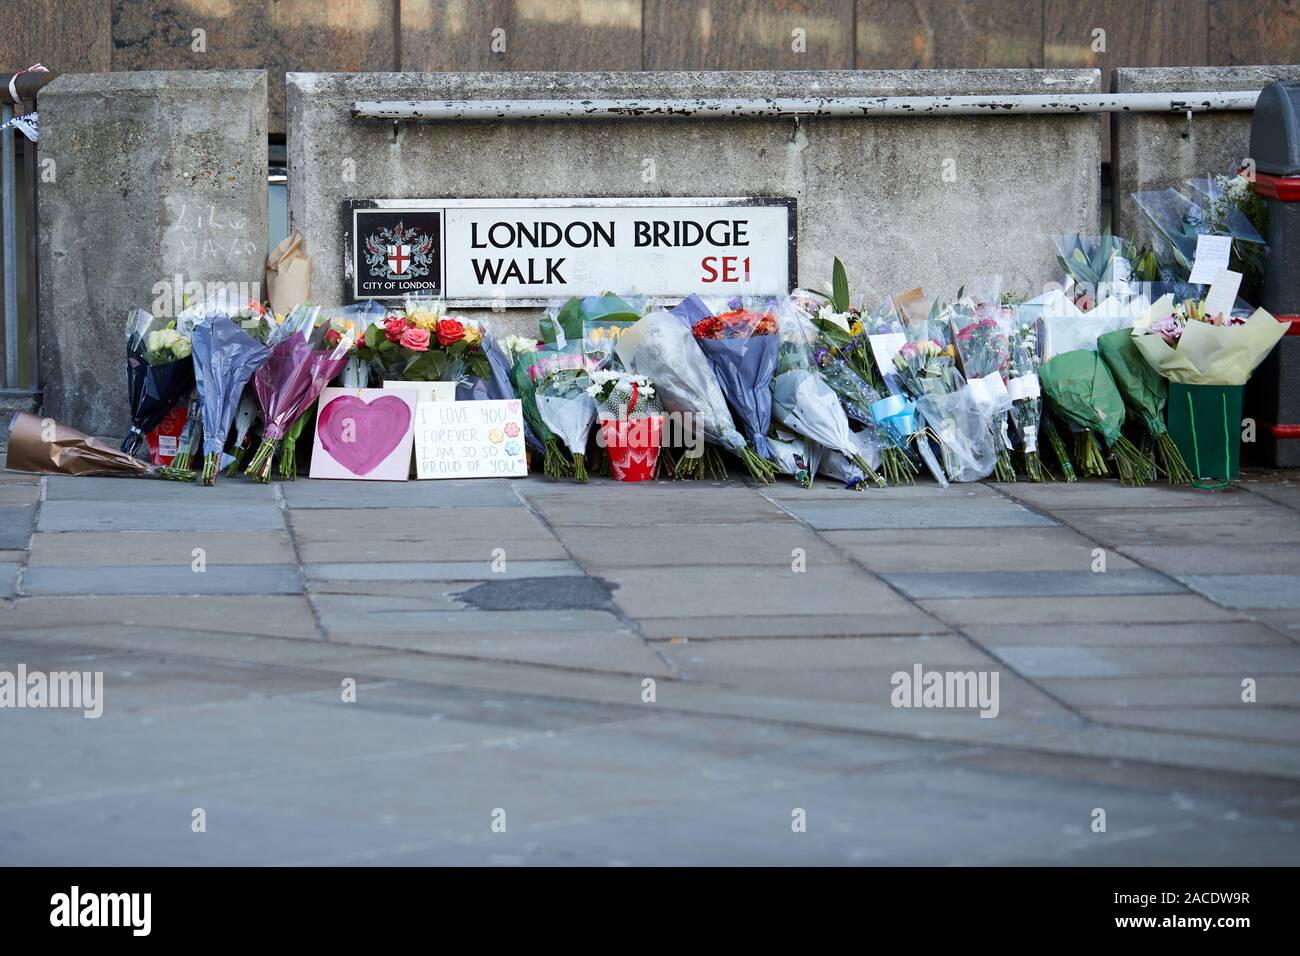 London, U.K. - Dec 2, 2019: Tributes left for the victims of the London Bridge terrorist attack, three days after the incident. Stock Photo